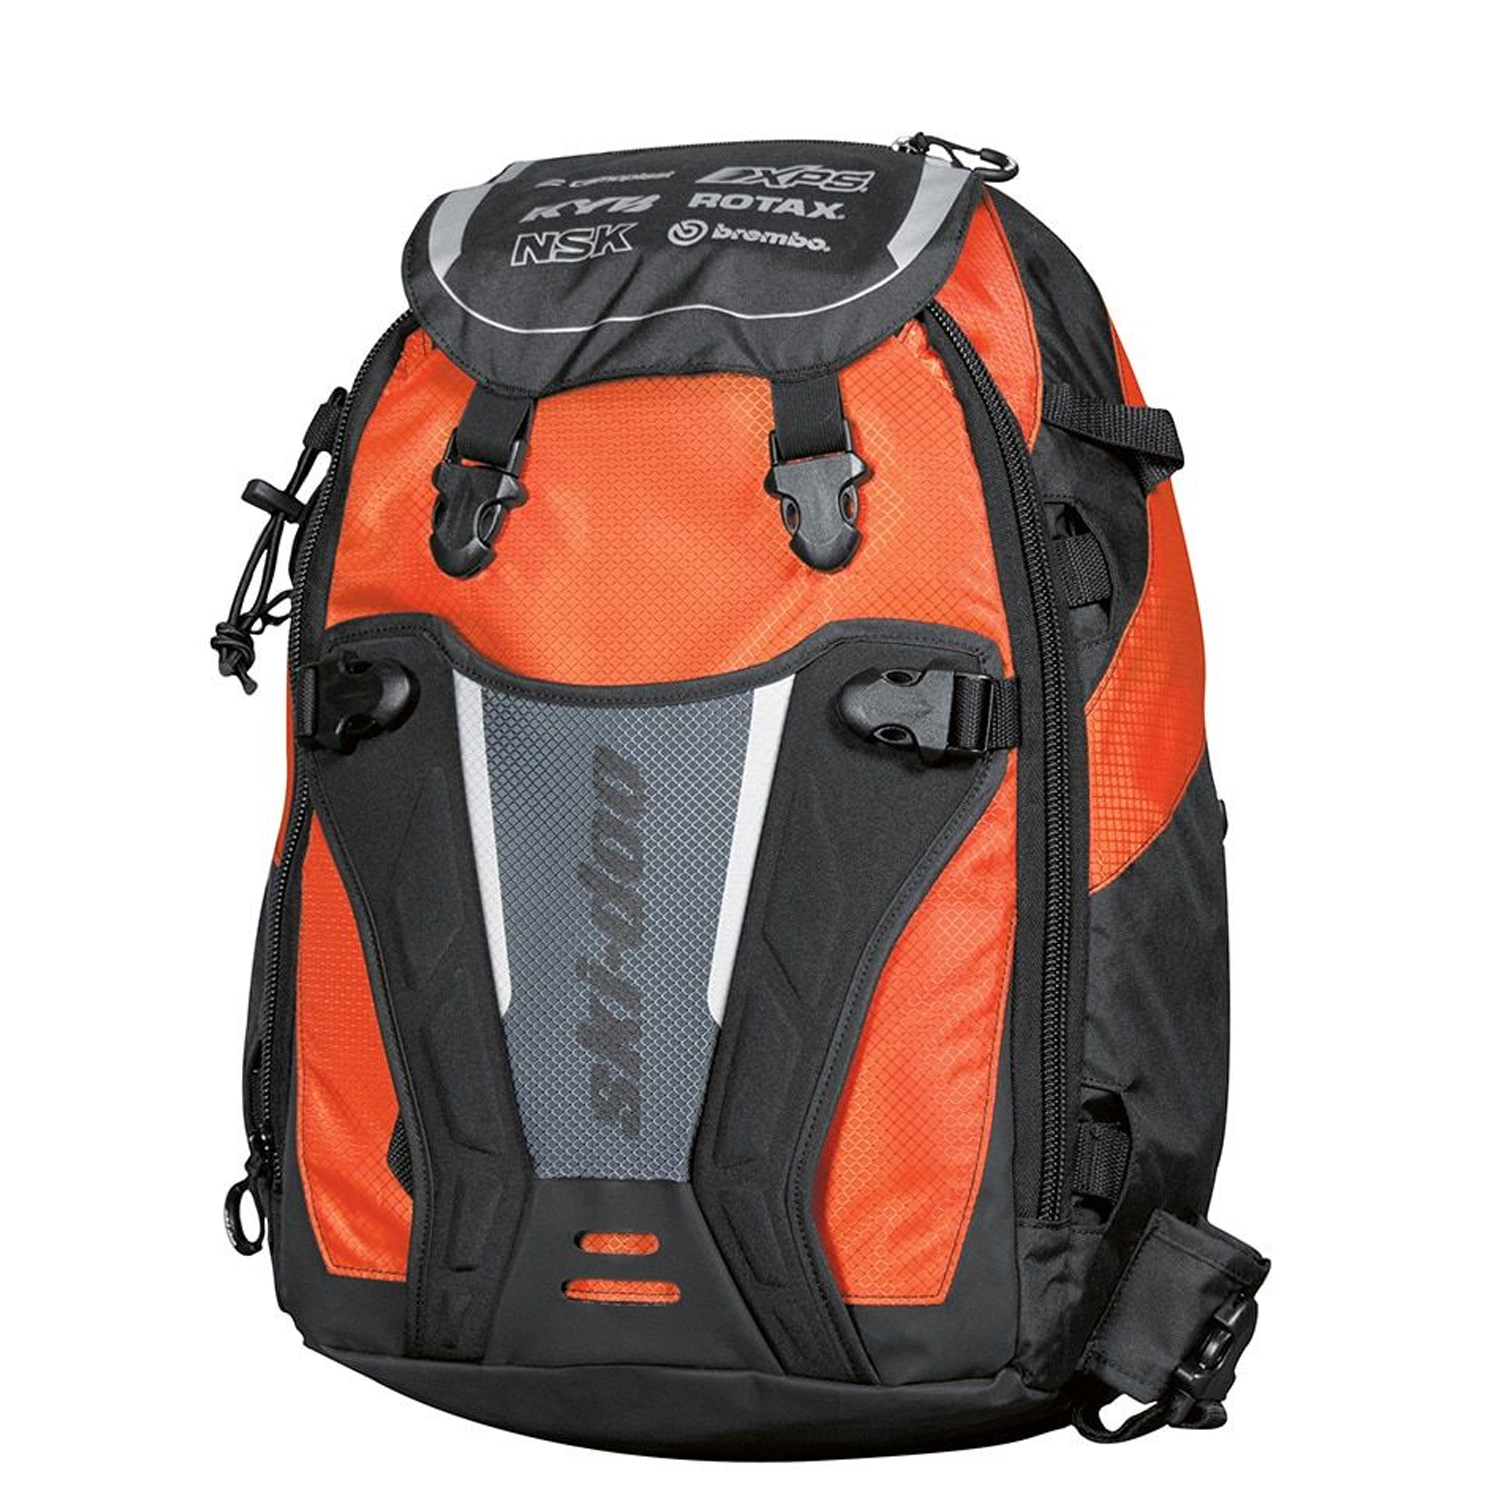 Ski-Doo New OEM Branded 28 Liter Tunnel Backpack With LinQ Soft Strap, 860200940 - image 1 of 3